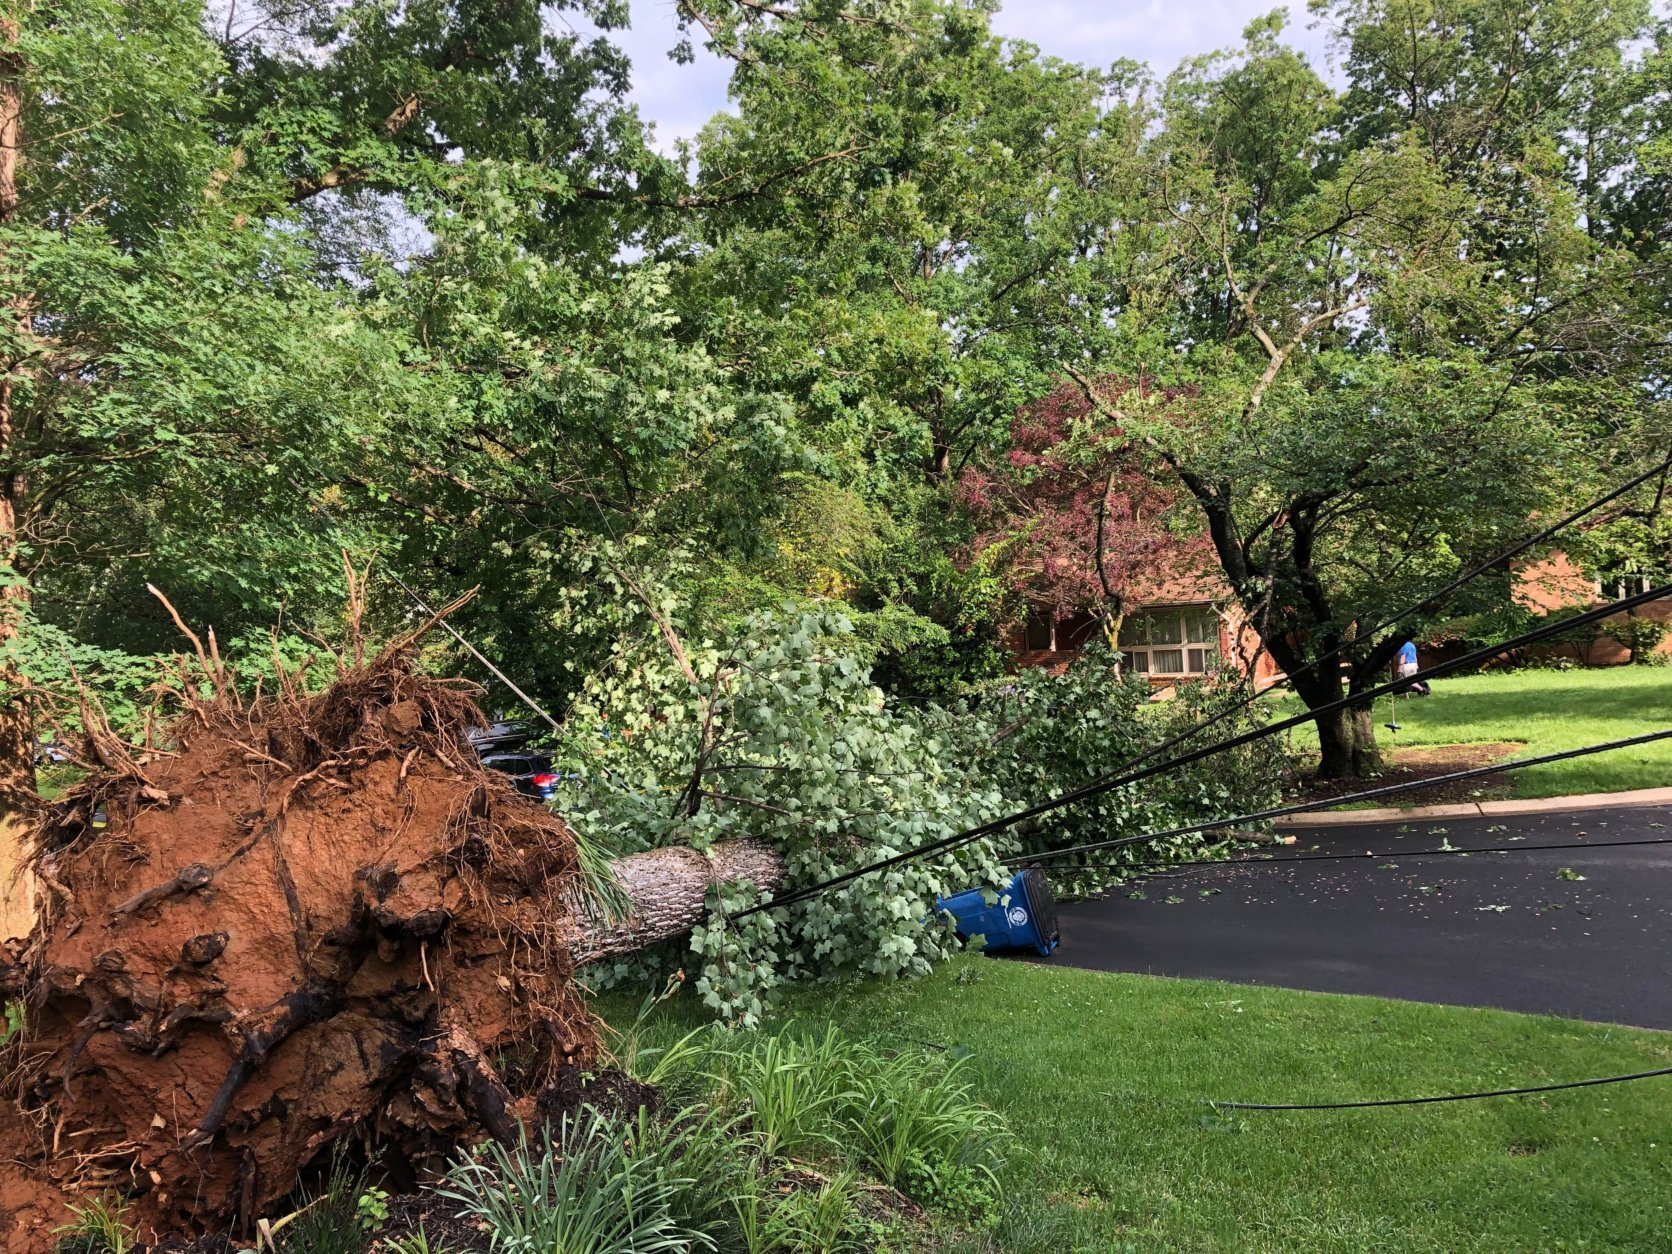 A fire burst in a Rockville, Maryland, neighborhood after a tree downed wires during a storm on Thursday, May 23, 2019. (WTOP/Mike Murillo)